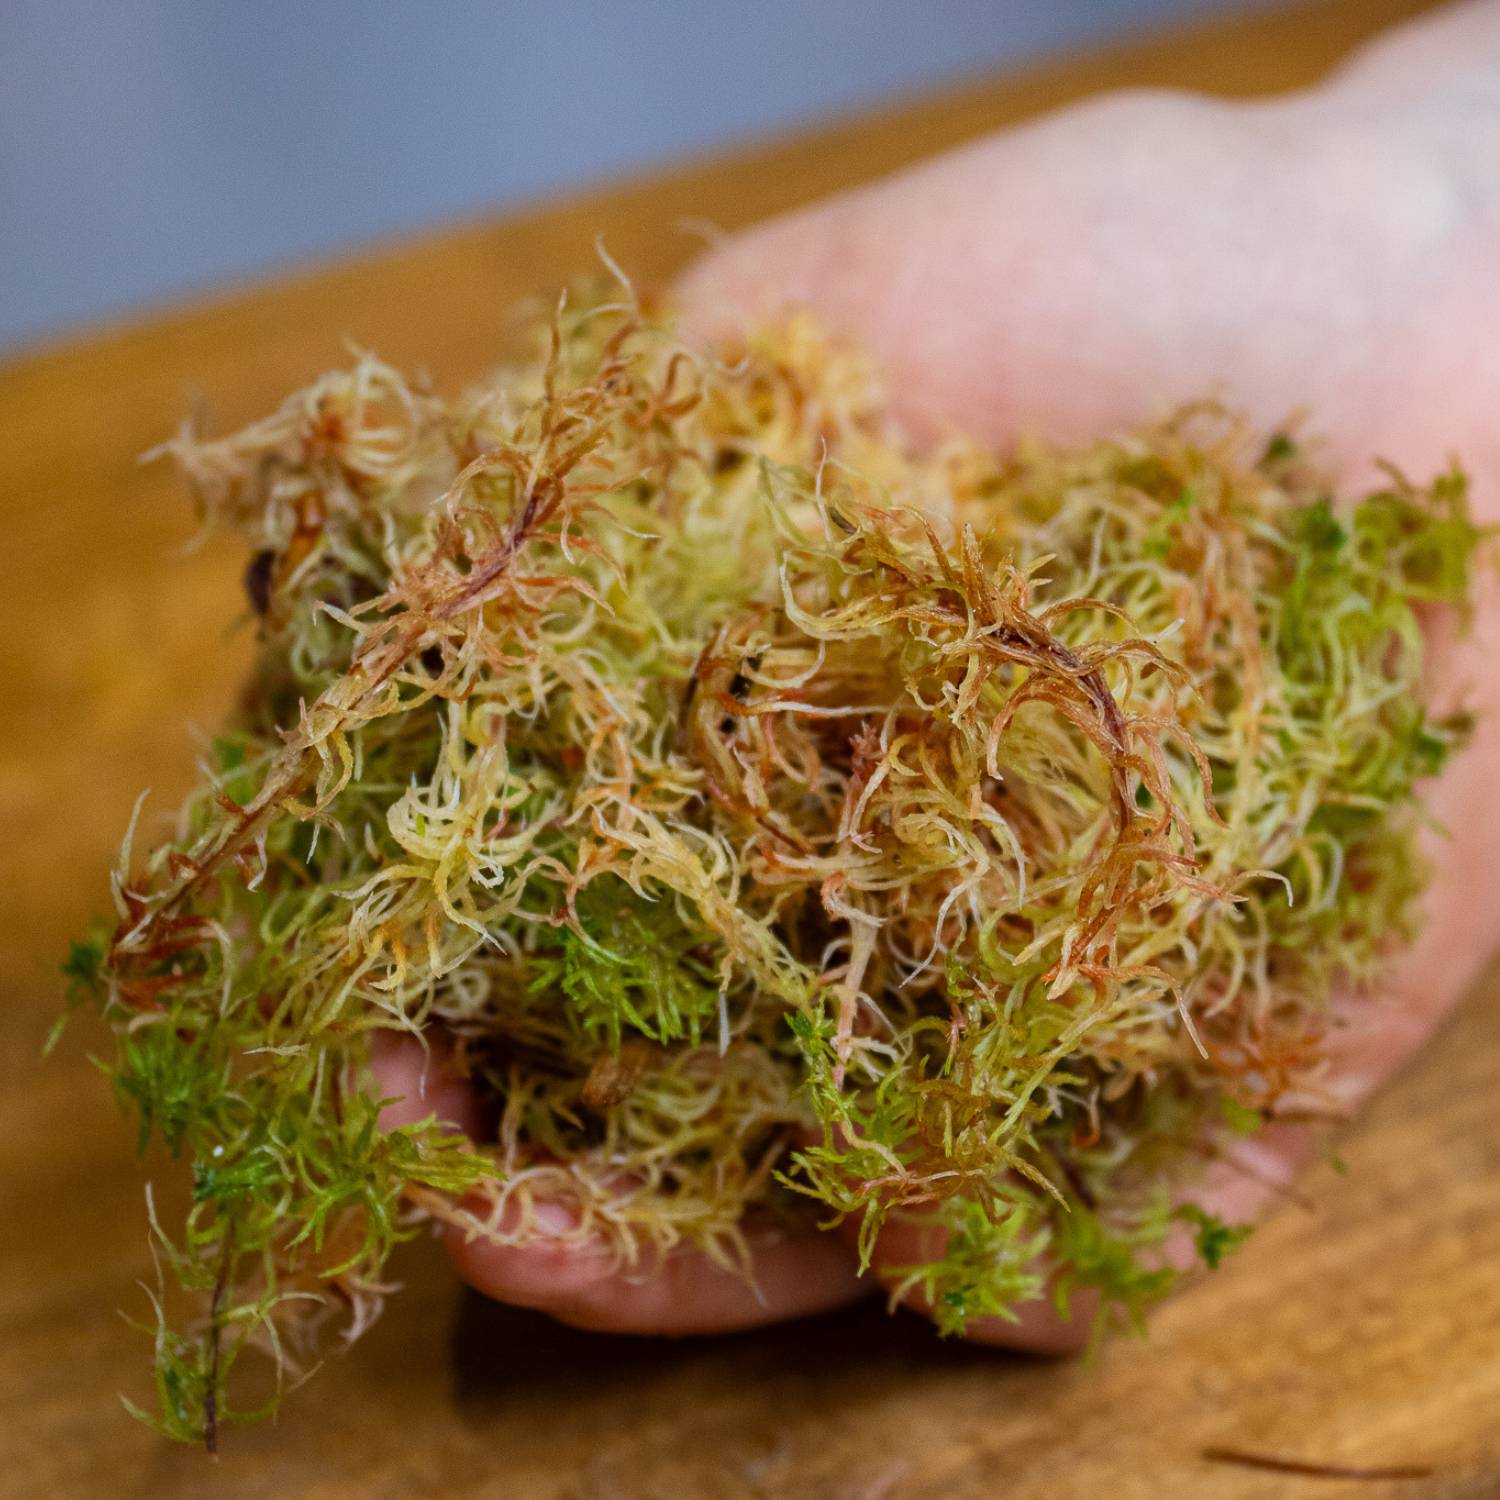 How to care for sphagnum moss